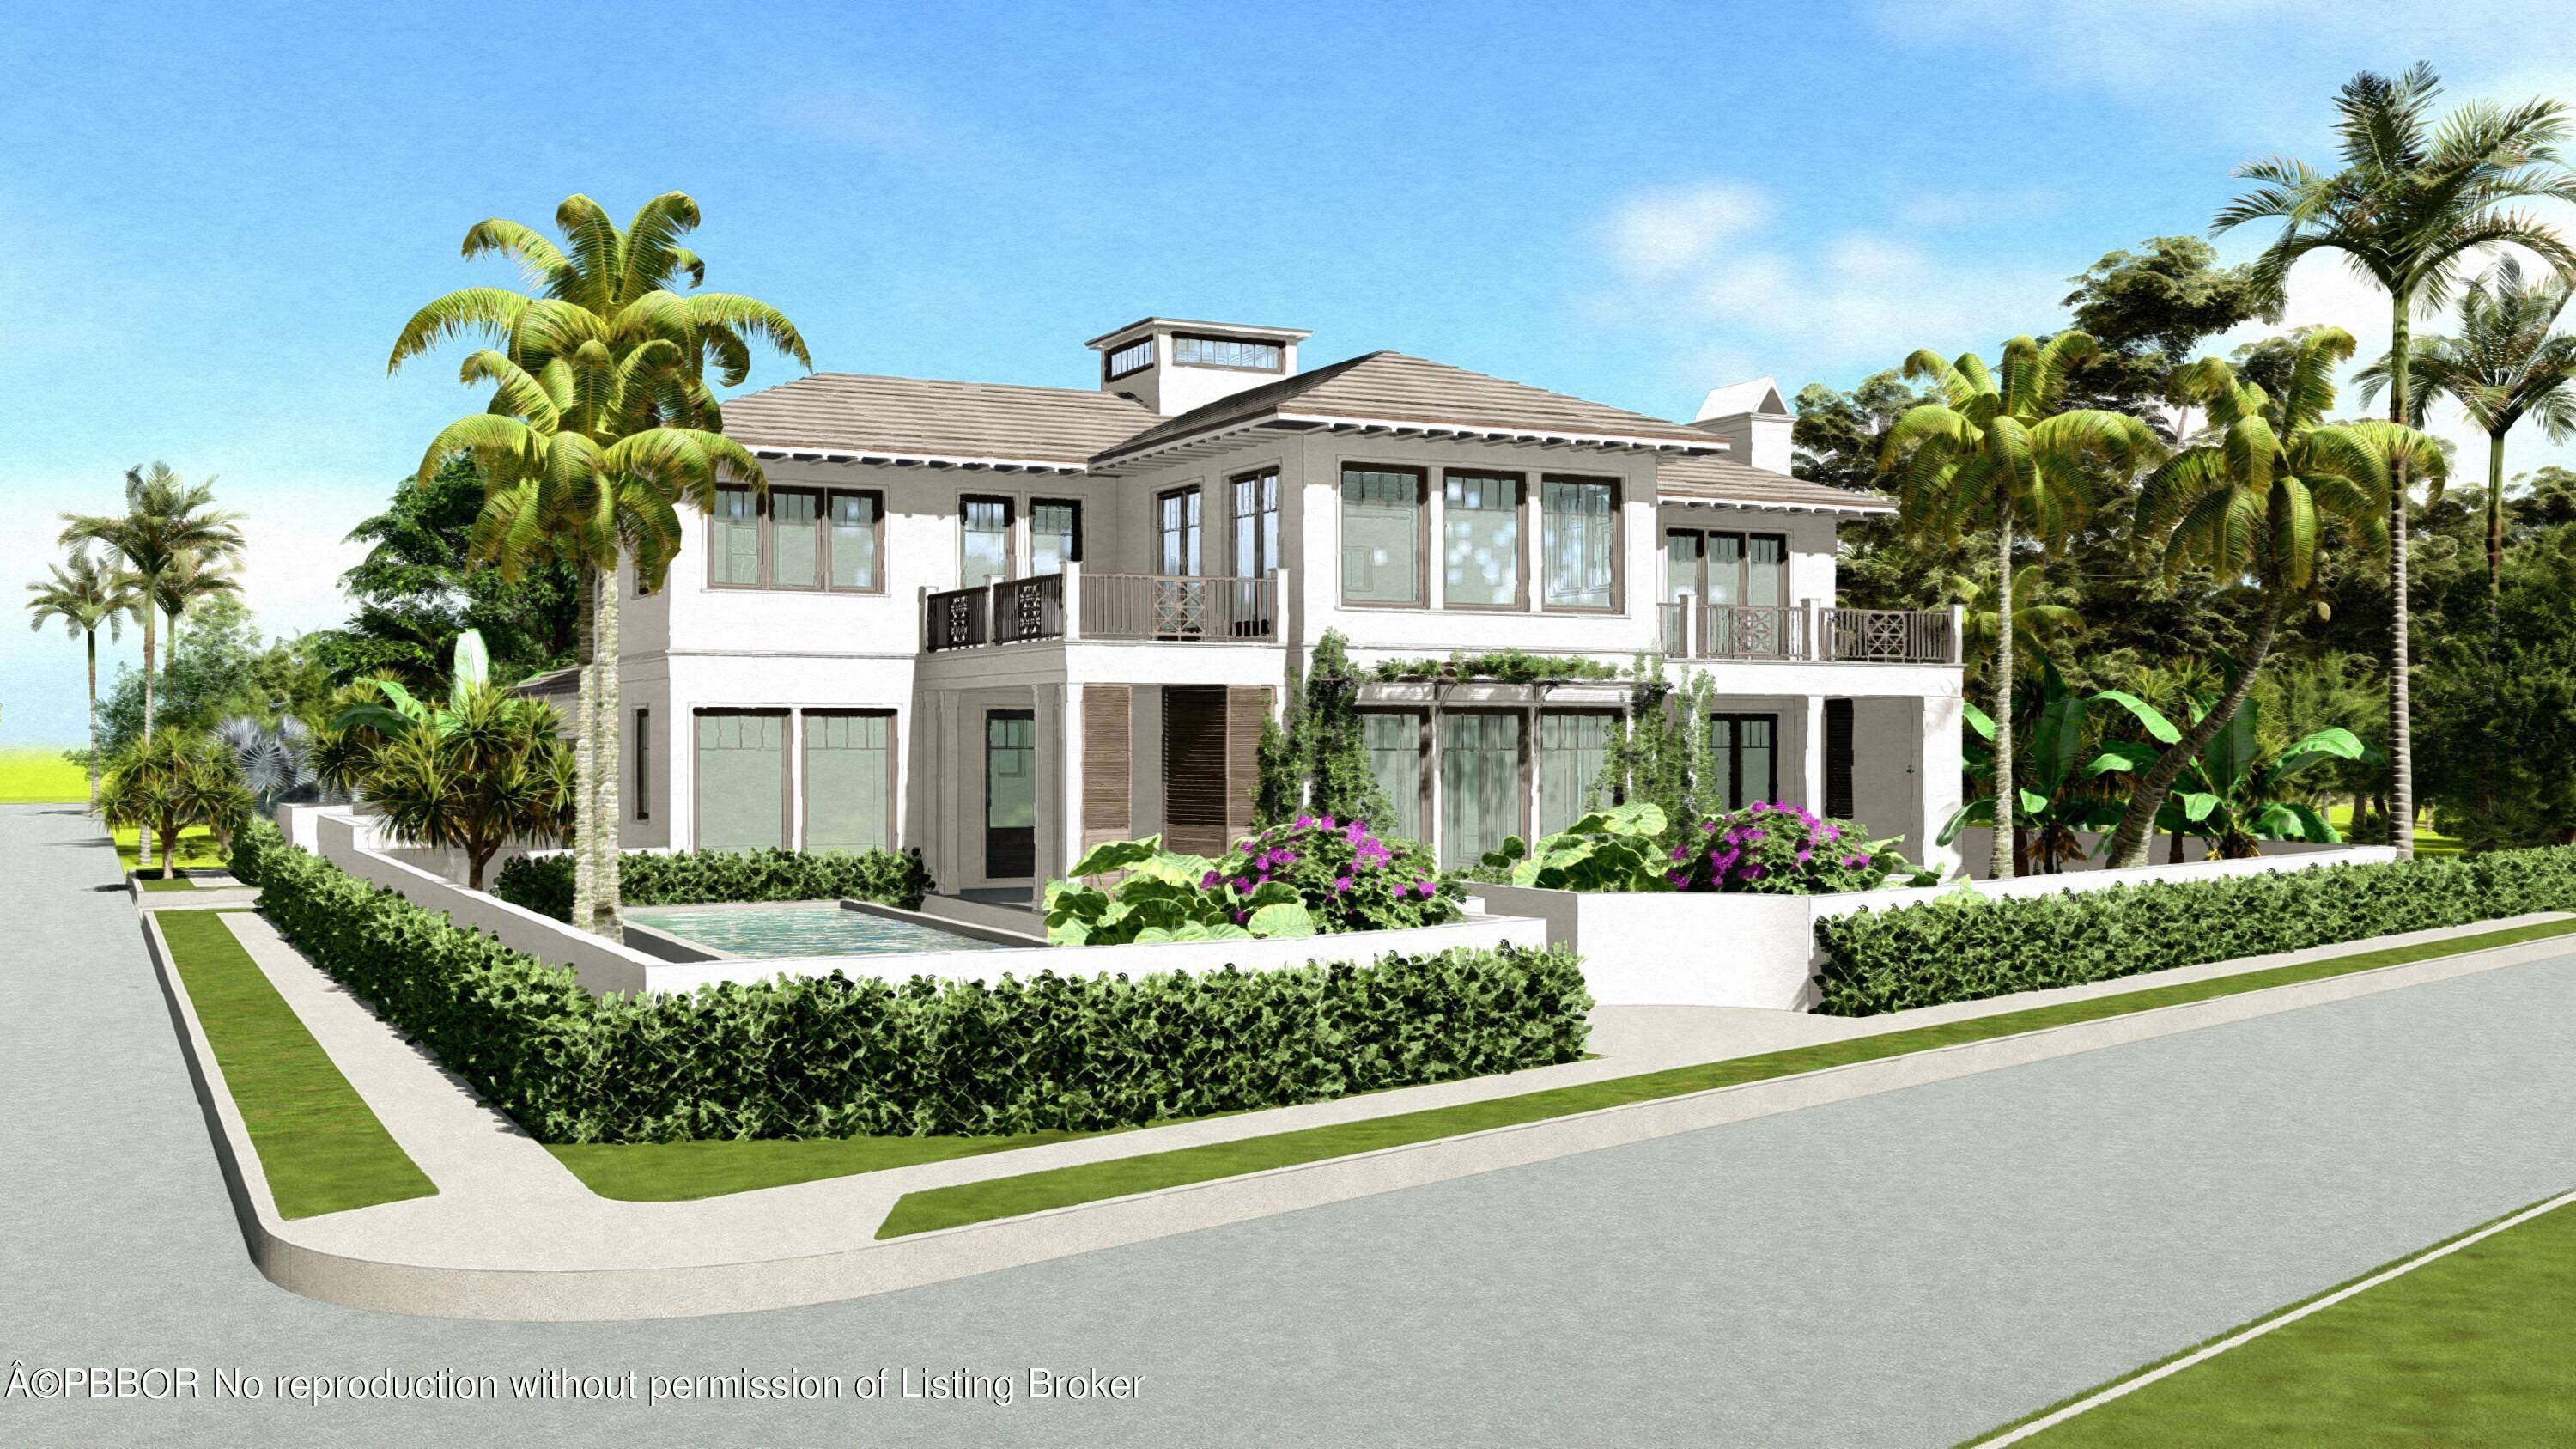 New West Palm Beach lakefront home.